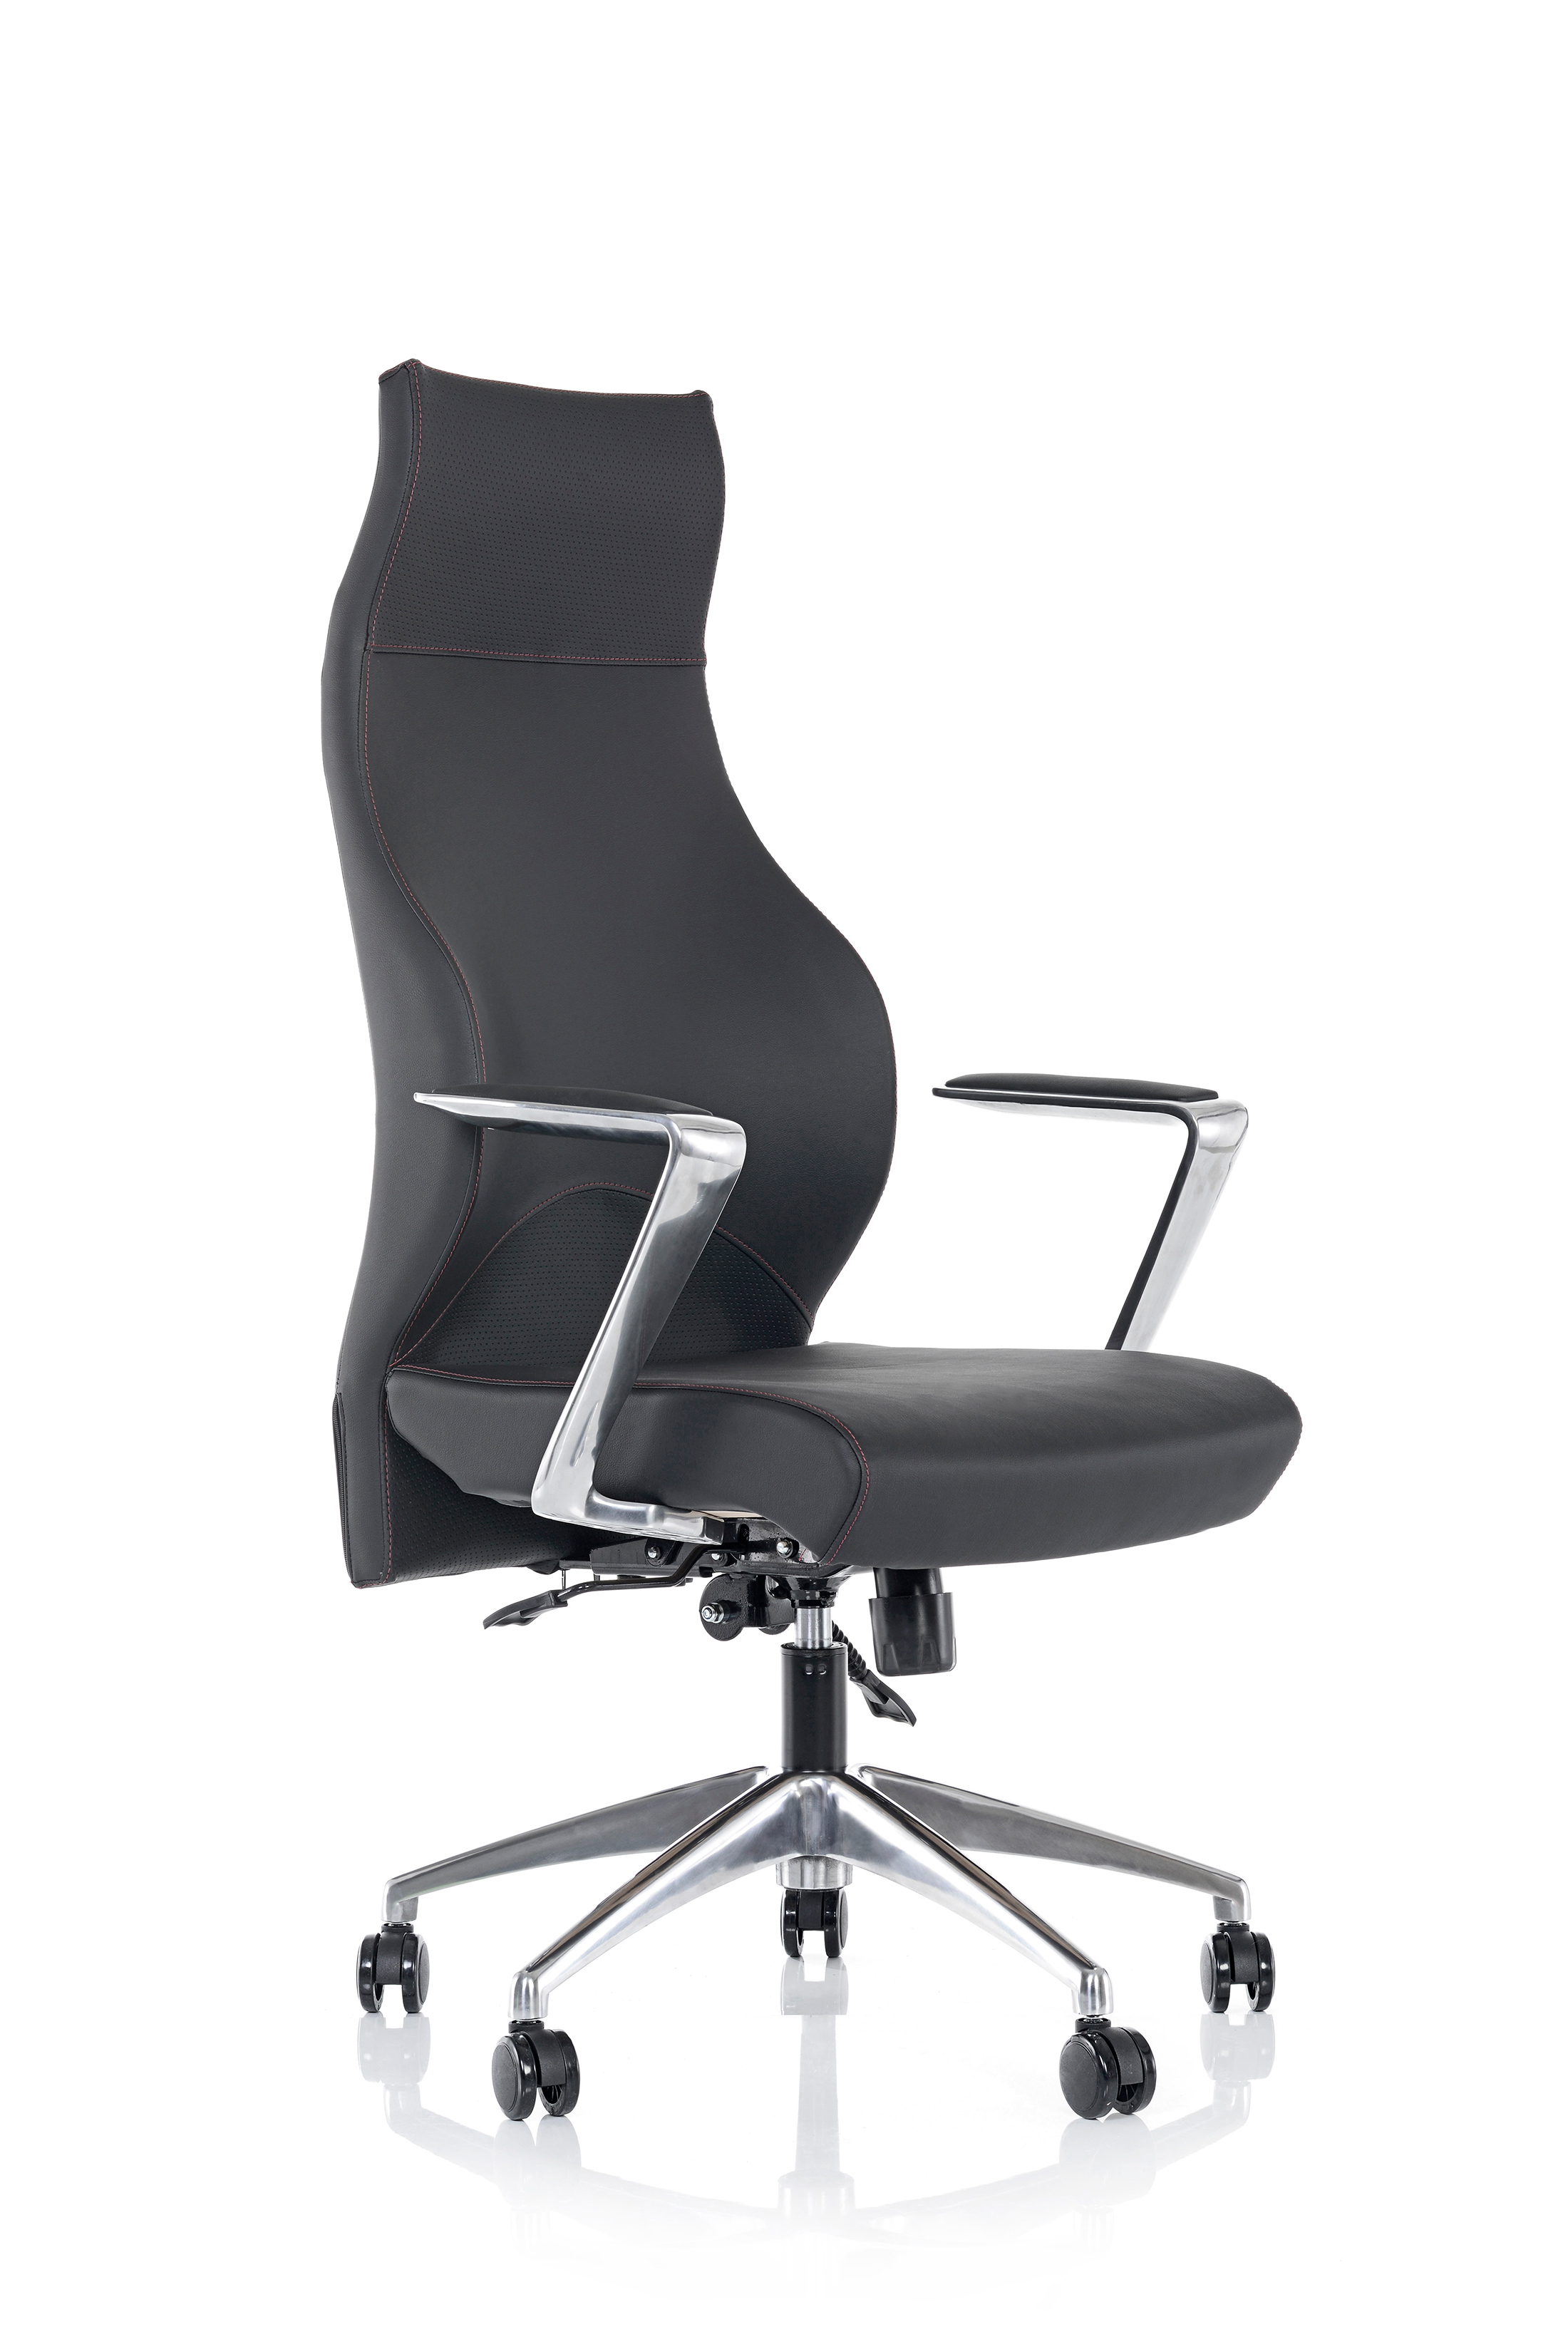 LUNA 000C MANAGER CHAIR